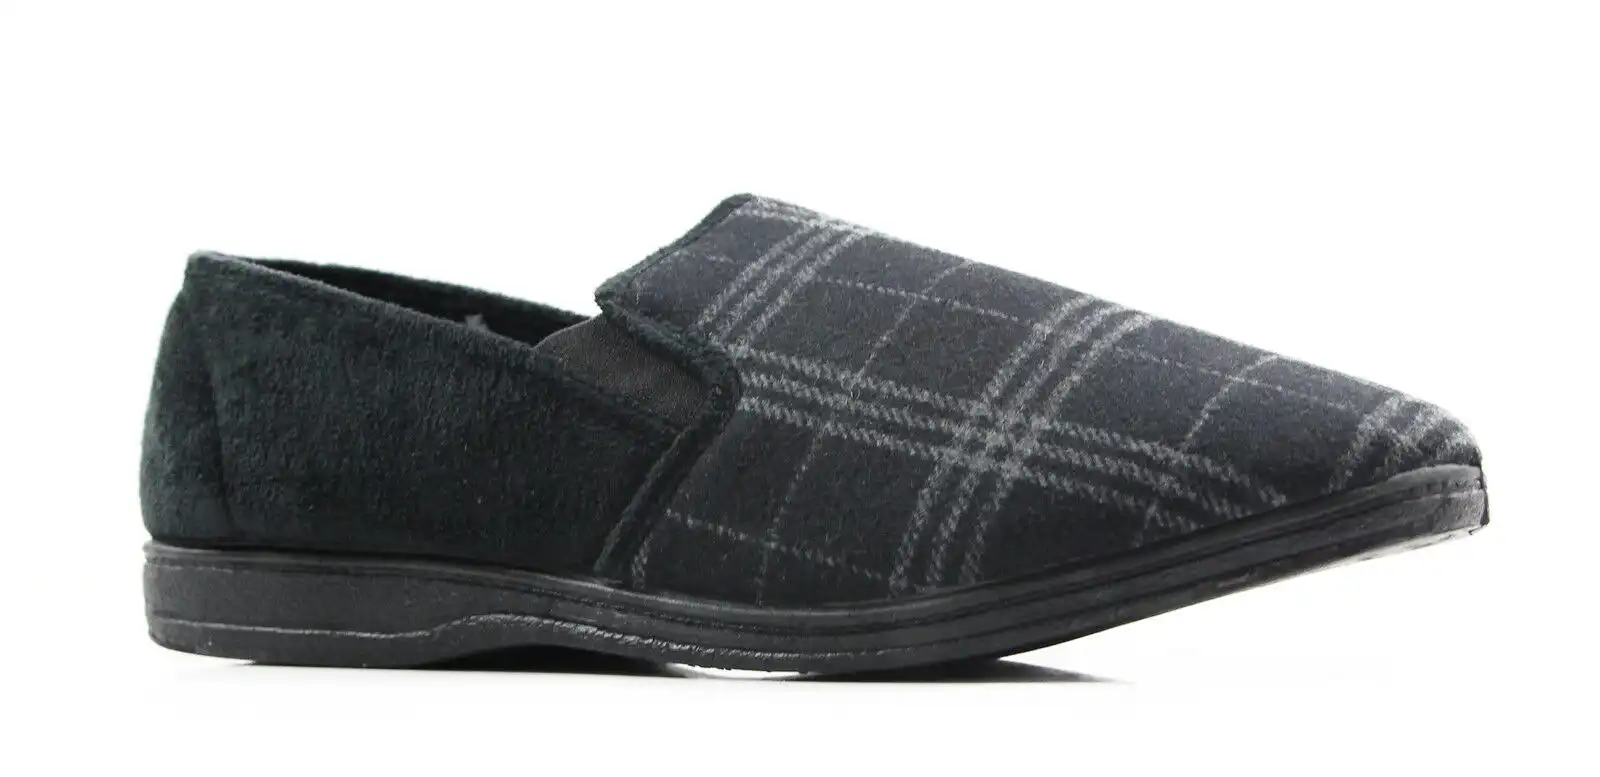 New Mens Grosby Fabio Comfortable Charcoal/Black Slippers Moccasins Warm Shoes